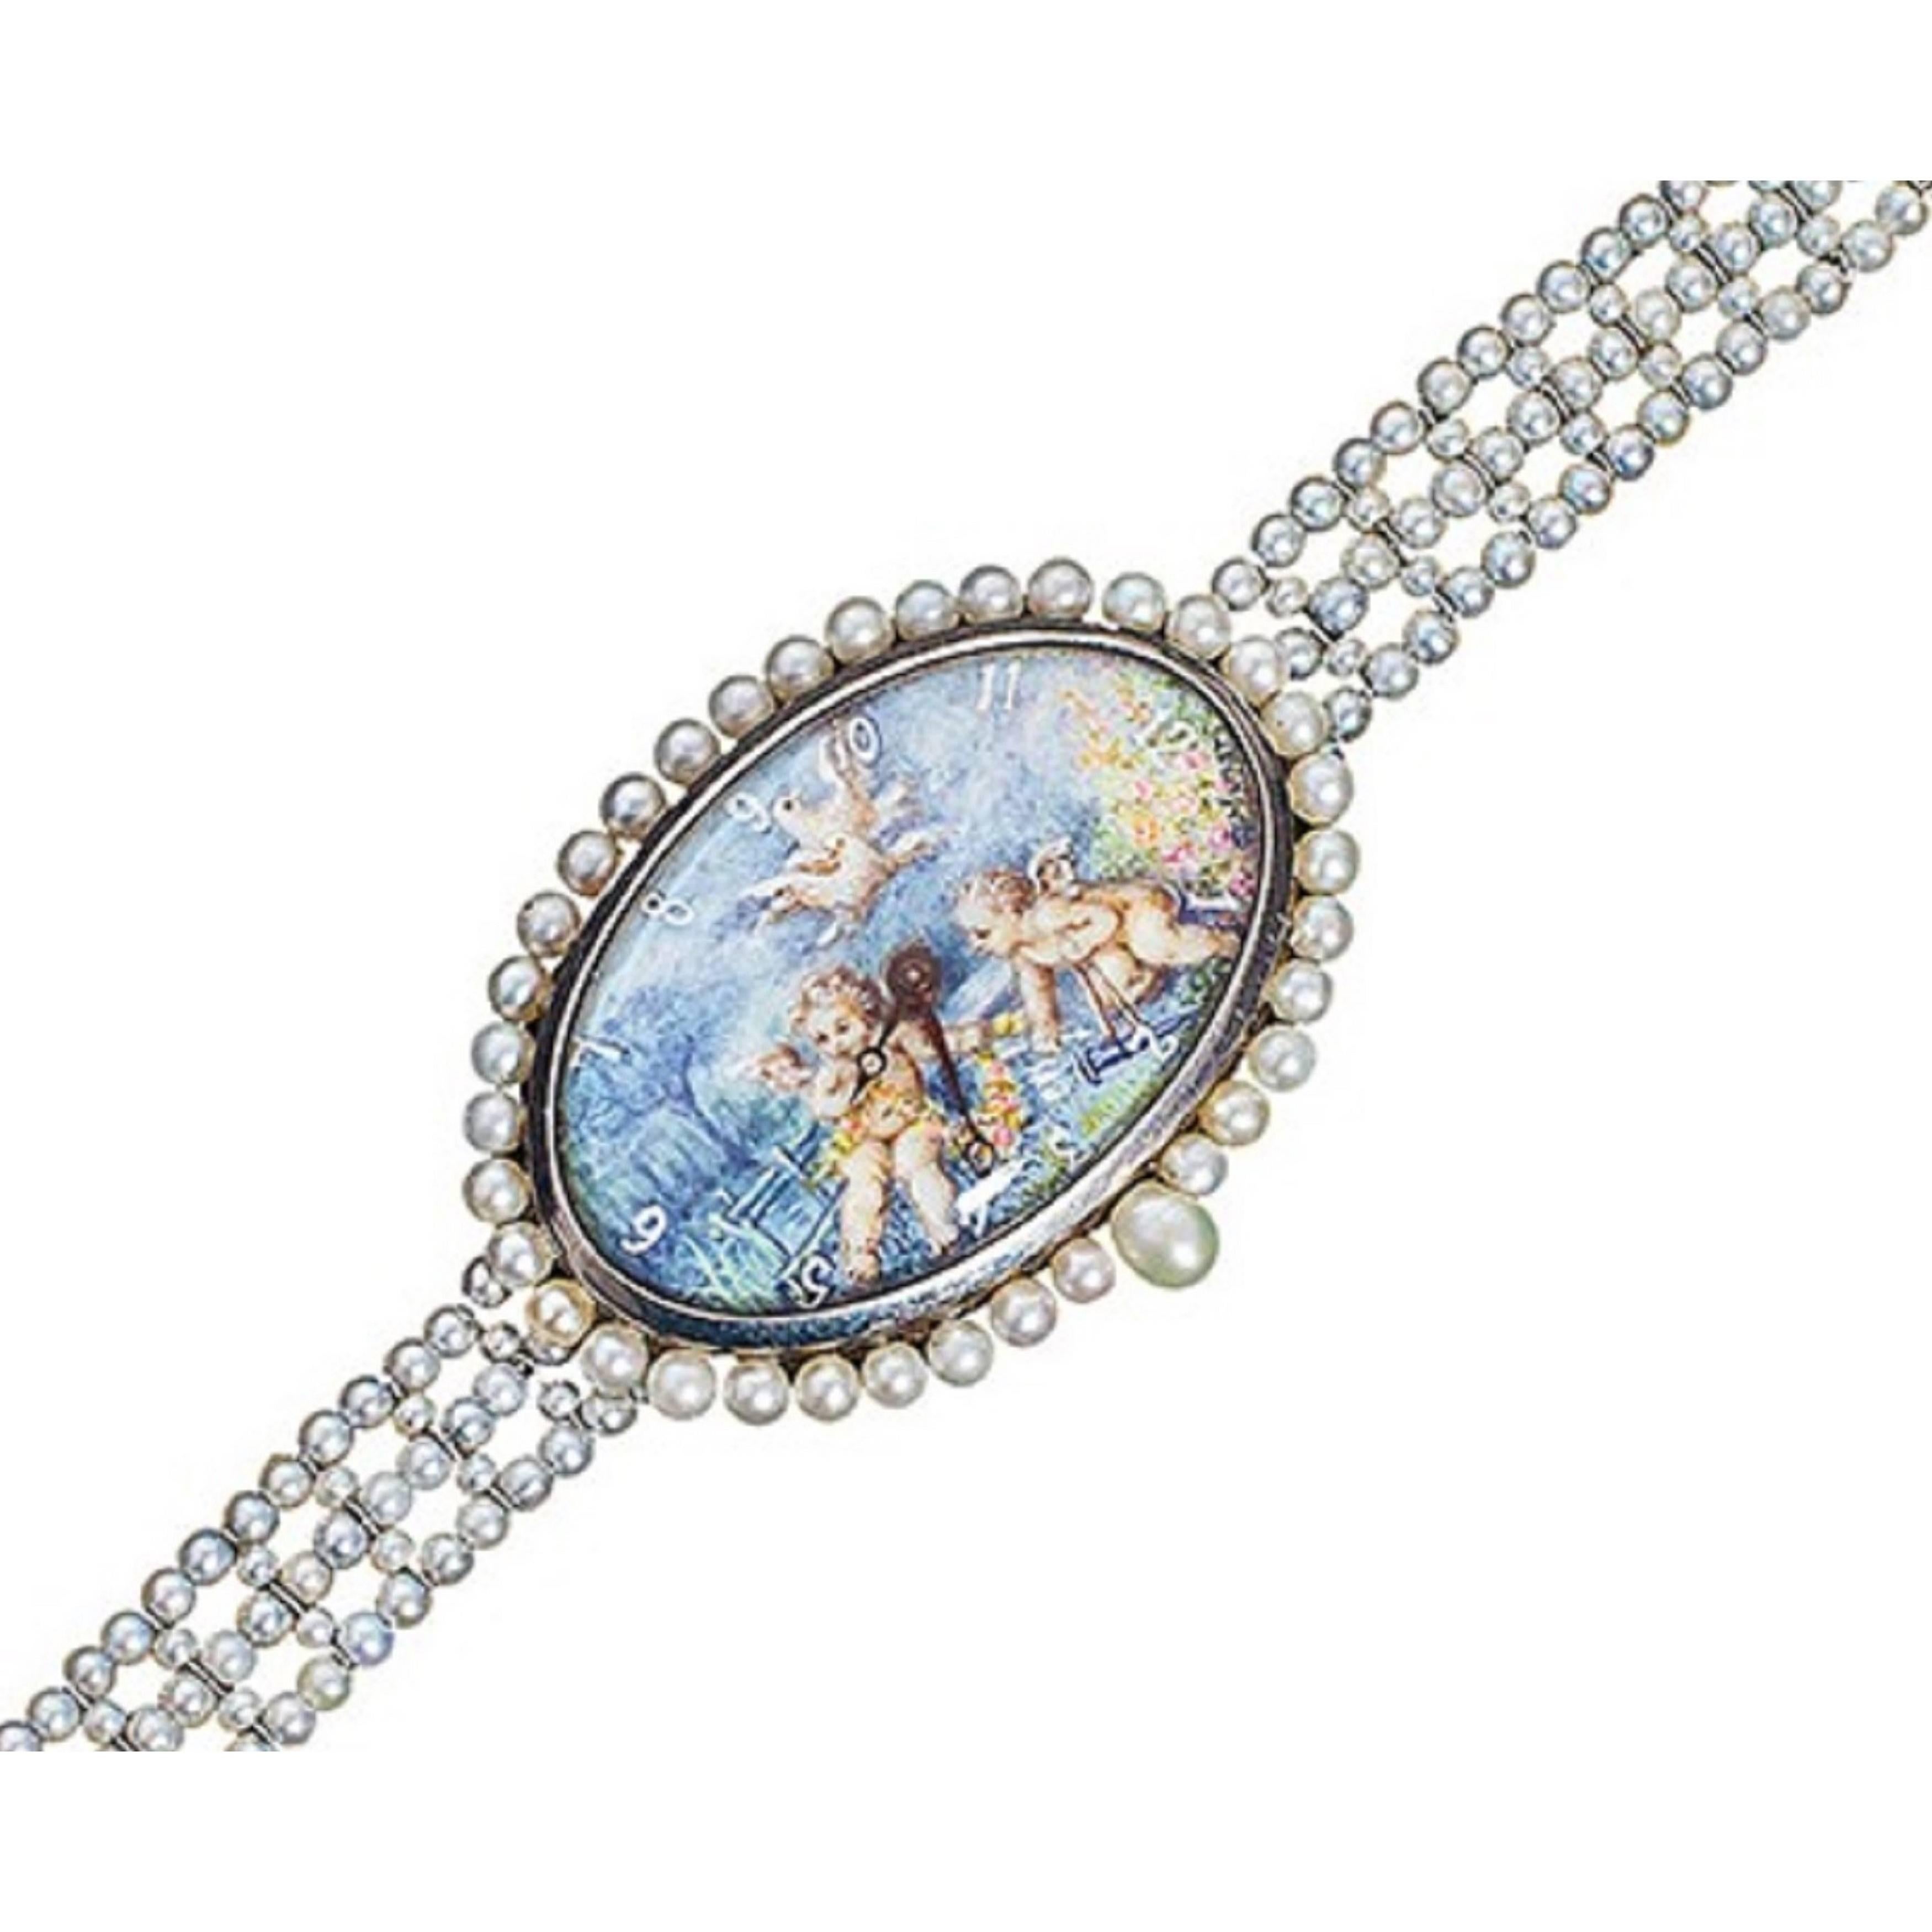 Paillet Ladies Platinum Natural Pearl Hand Painted Wristwatch For Sale